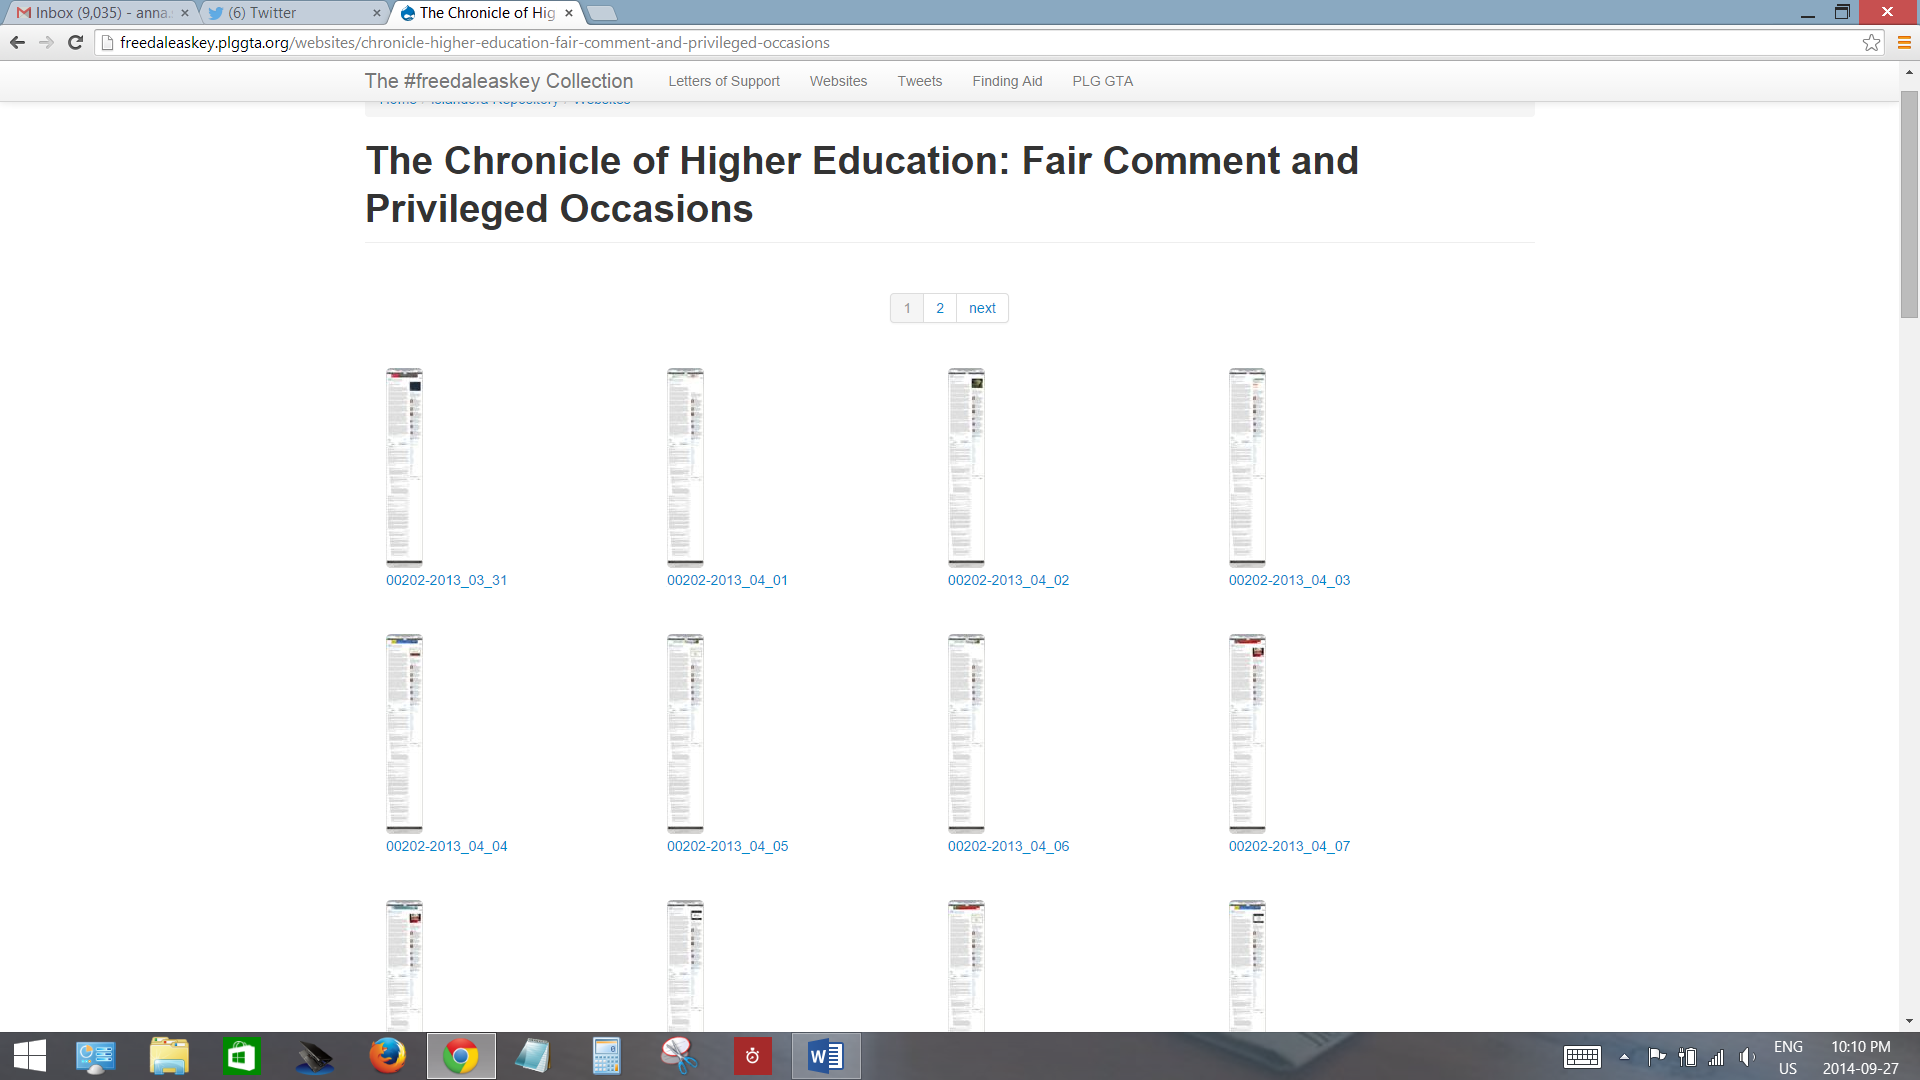 Example of individual crawls of a blog post from The
        Chronicle of Higher Education